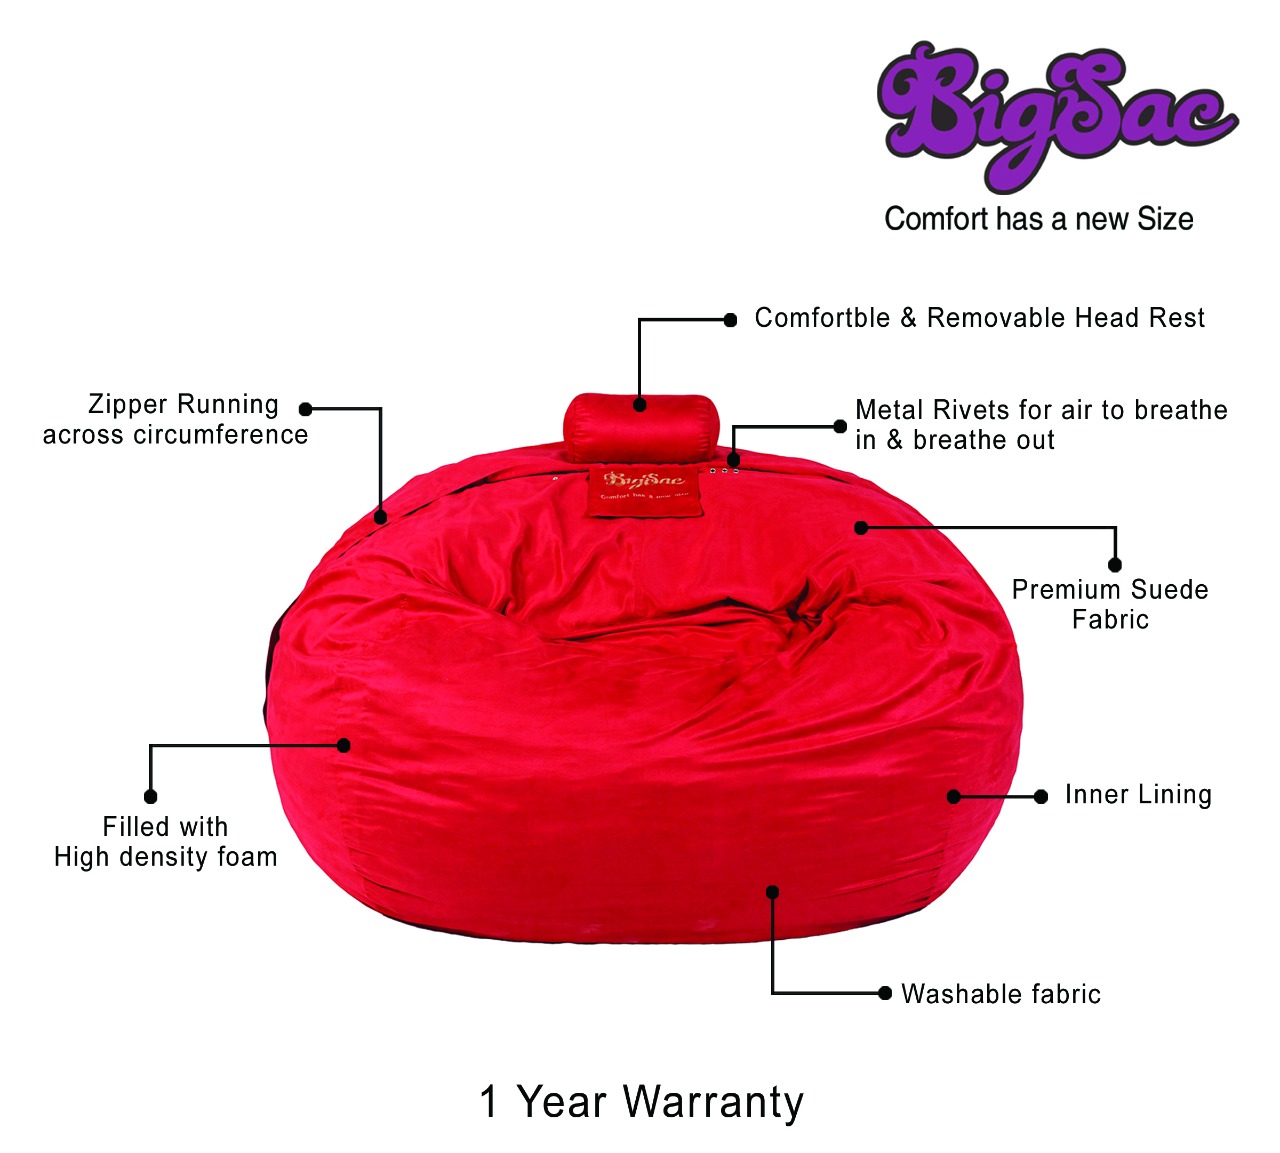 Big Sac 4.5 Feet Movie Sac Premium Suede Fabric Filled Red Color - 5 Years Warranty    